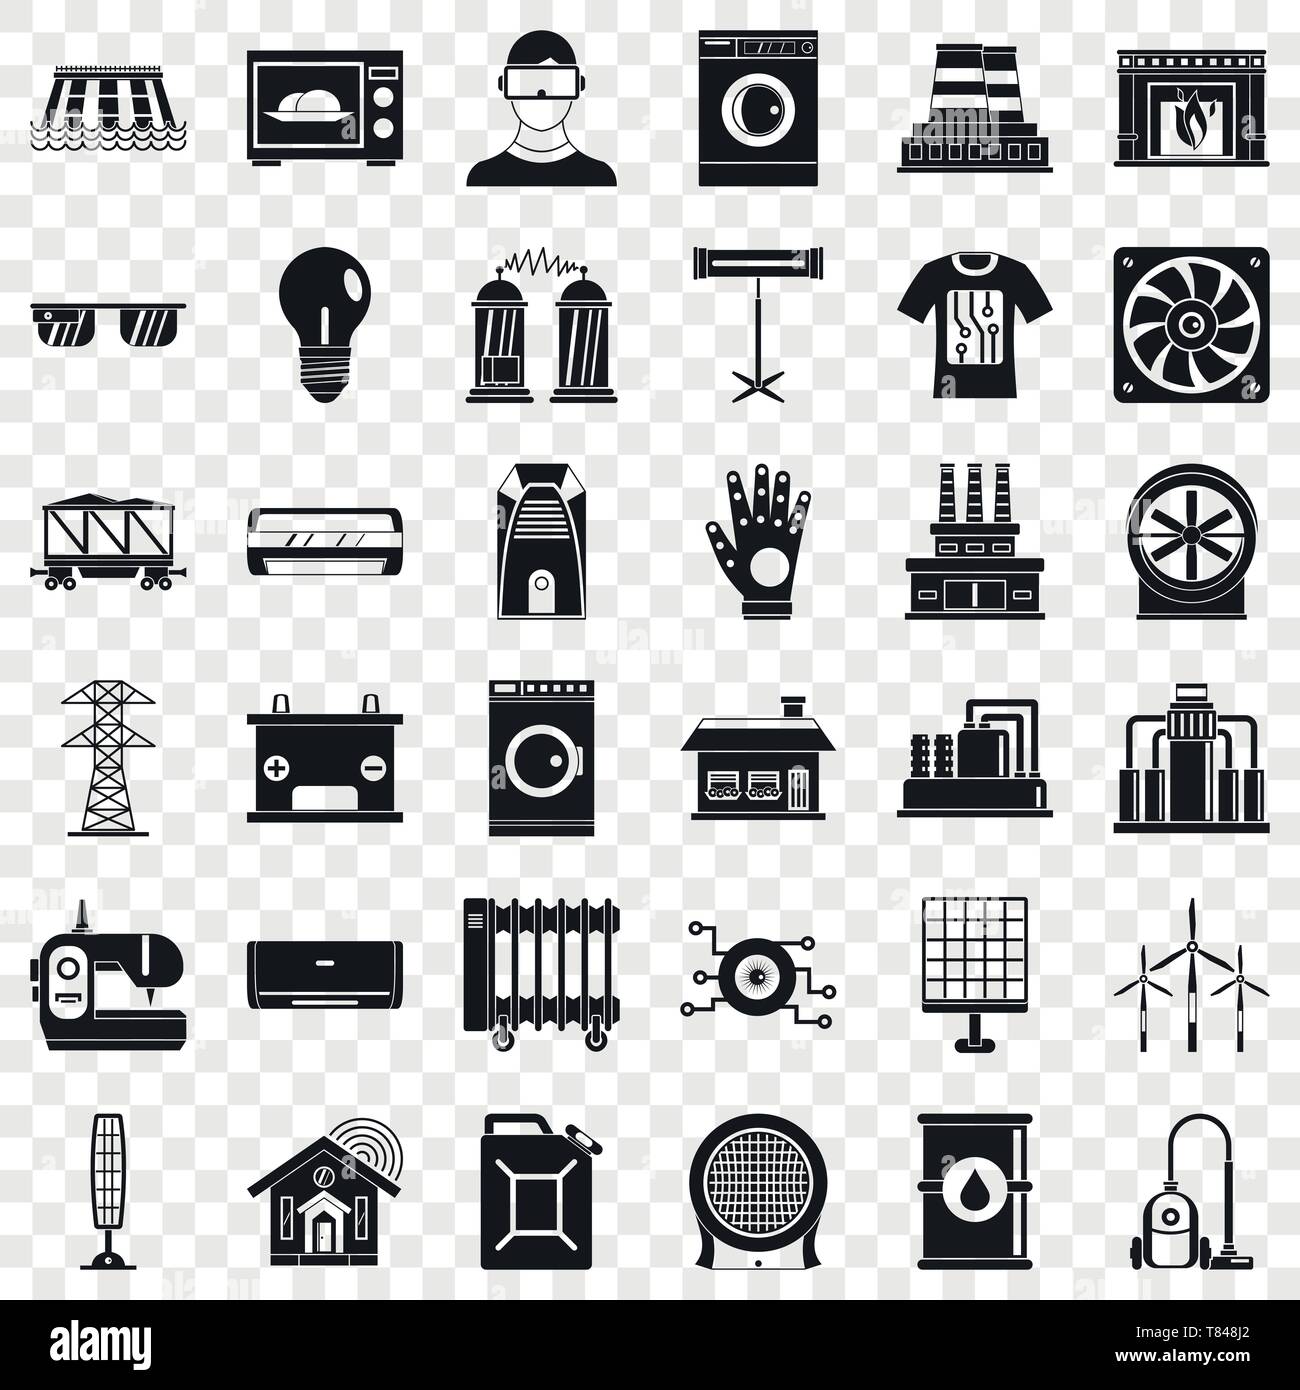 Saving electricity icons set, simple style Stock Vector